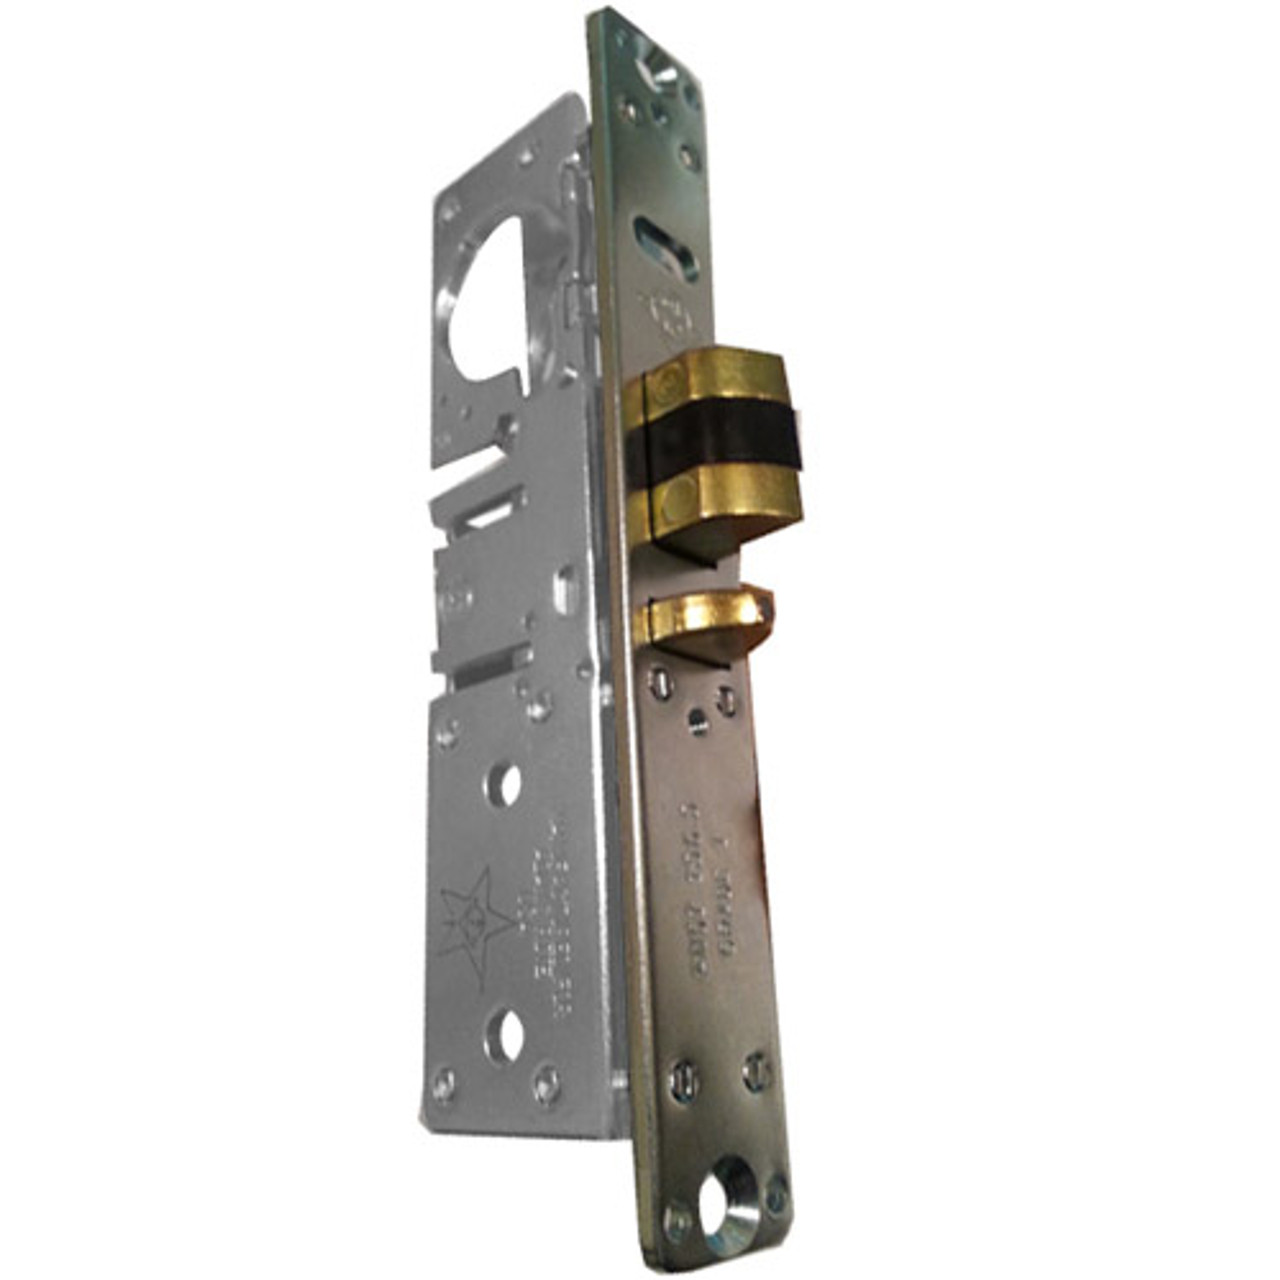 4512-46-202-628 Adams Rite Standard Deadlatch with Bevel Faceplate in Clear Anodized Finish